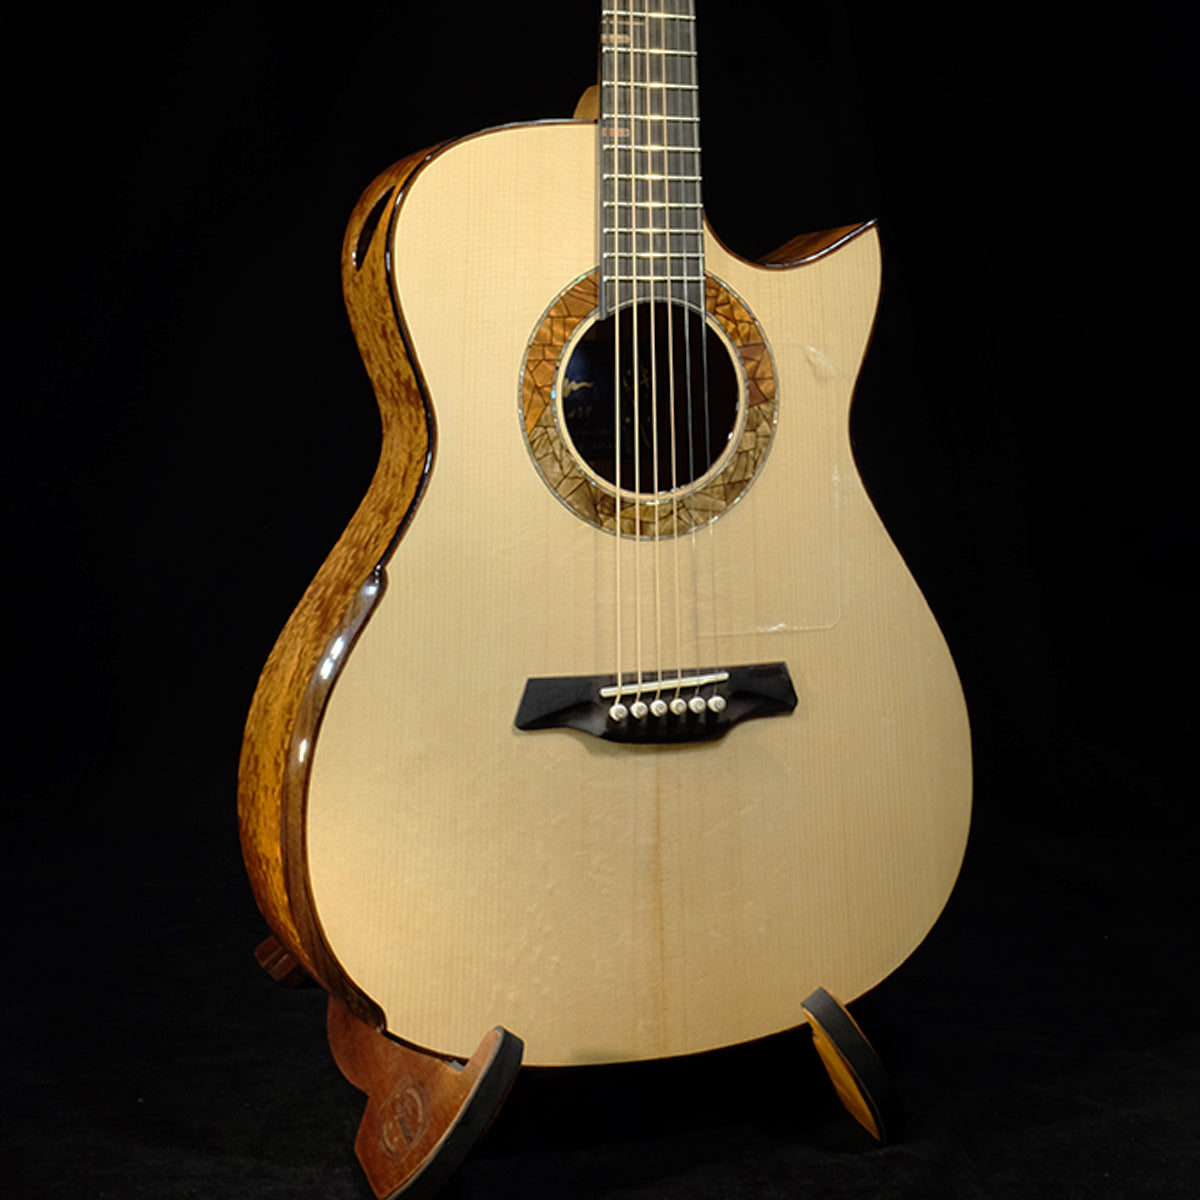 Blue Label OM Adirondack Spruce with Quilted Sapele | #37